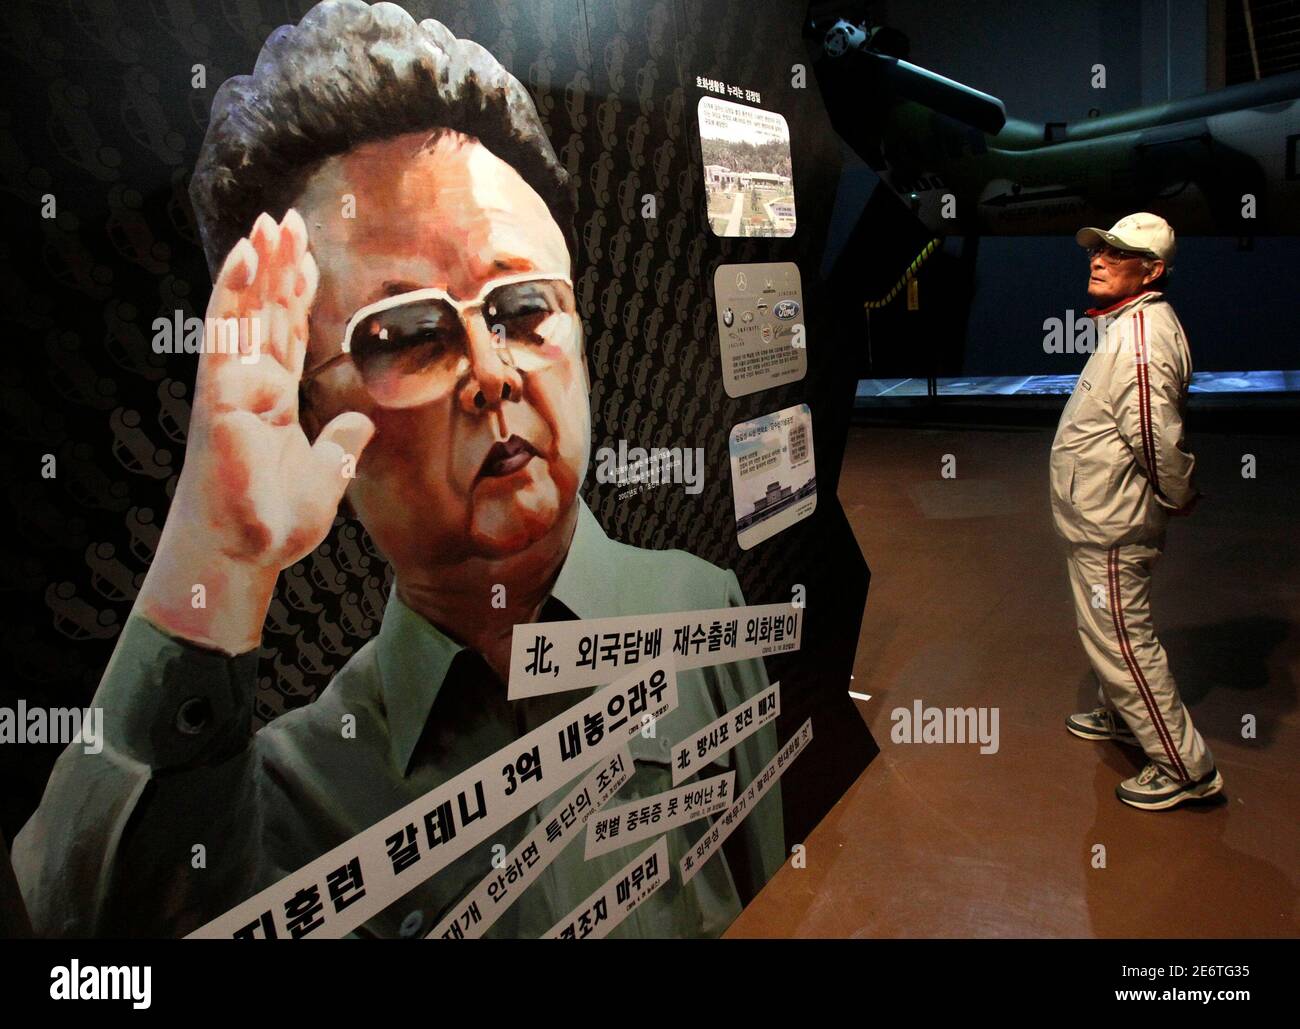 A man looks at a portrait of North Korean leader Kim Jong-il during the Korean War exhibition at the Korean War Memorial Museum in Seoul May 23, 2010. The United Nations Command (UNC) has launched an investigation into whether North Korea violated the Korean War armistice by sinking one of the South's naval ships, the U.N. body said on Saturday. North Korea denounced the probe as a 'bogus mechanism.'  REUTERS/Jo Yong-Hak (SOUTH KOREA - Tags: POLITICS MILITARY IMAGES OF THE DAY) Stock Photo